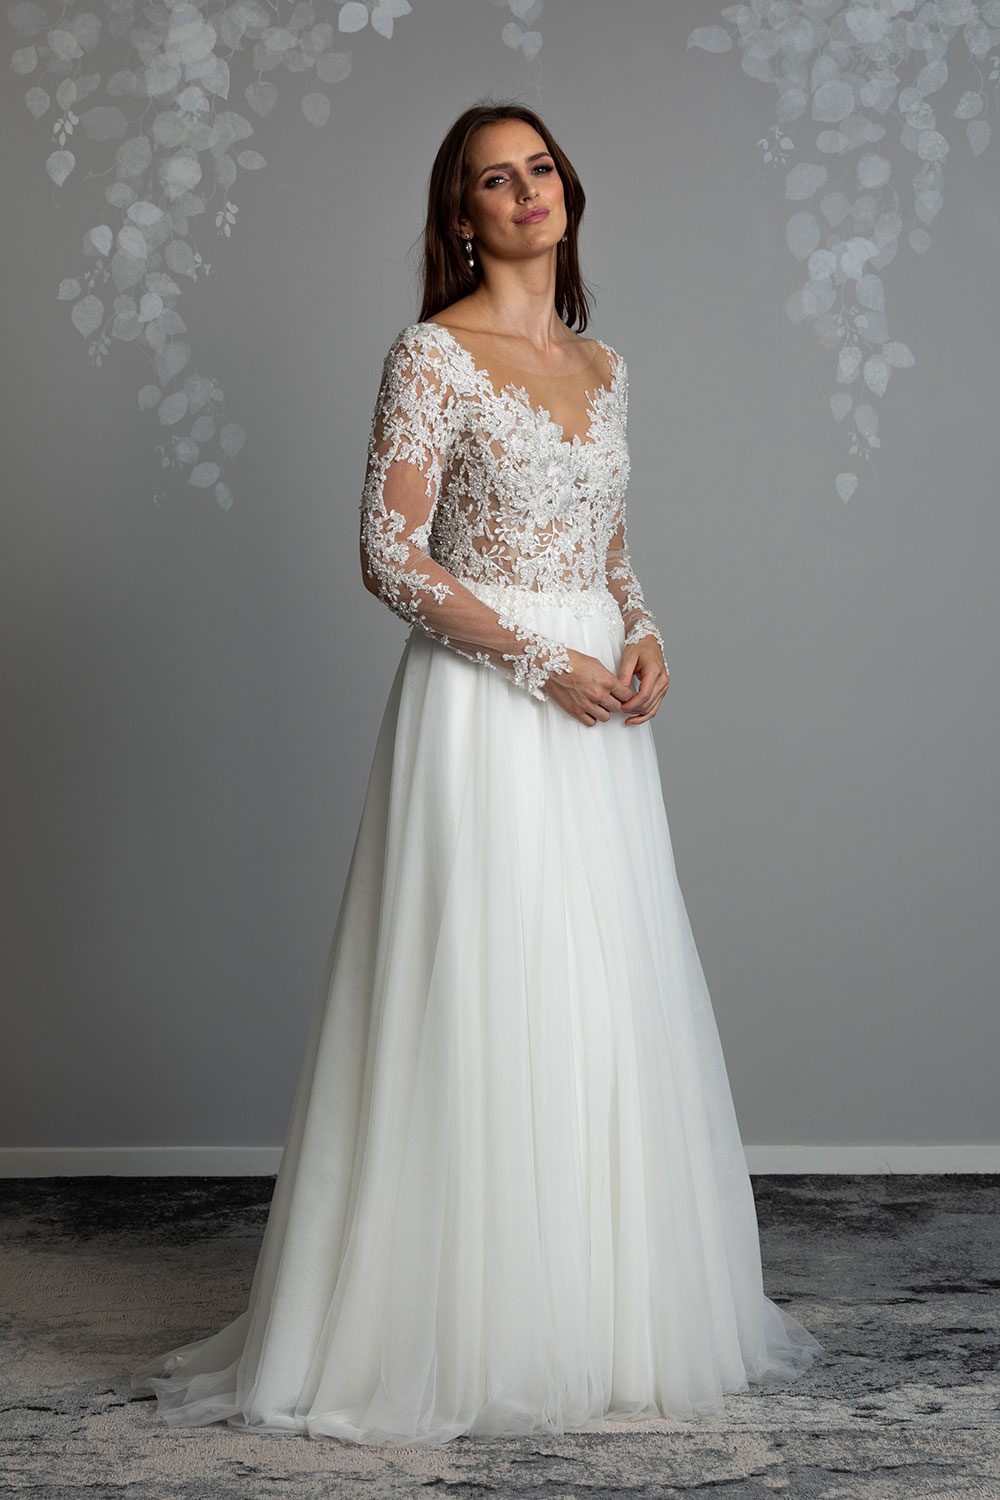 Maia Wedding gown from Vinka Design - This feminine & romantic wedding dress features beautiful pearl & bead embroidery over 3D lace. Long sleeves with pearl buttons, illusion neckline and skirt of dreamy layers of soft tulle. Full length view of romantic dress with beautiful long lace sleeves and flowing tulle skirt